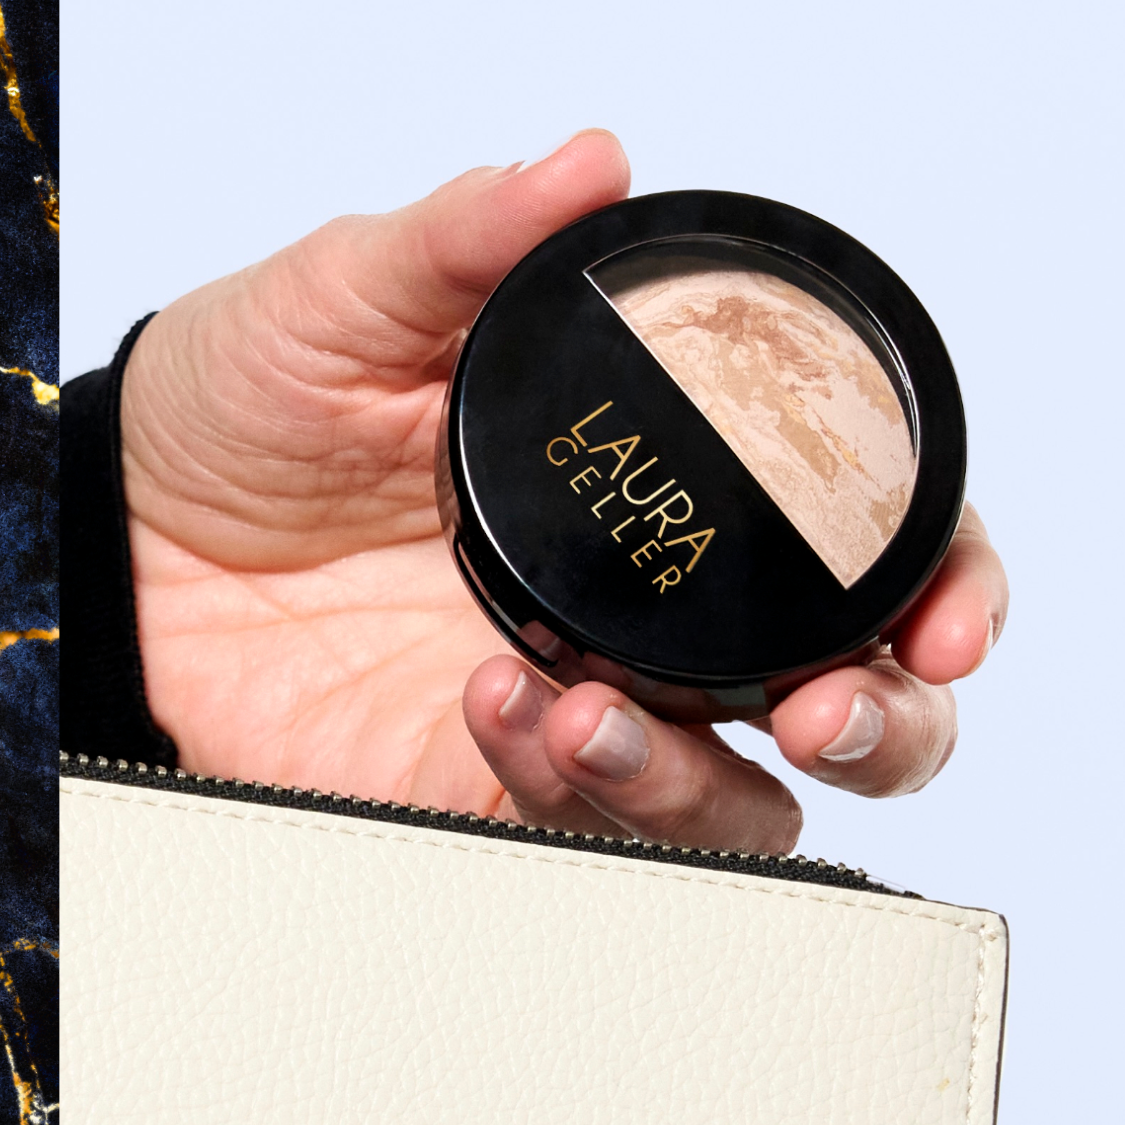 A hand holding a Baked Balance-n-Brighten Foundation compact